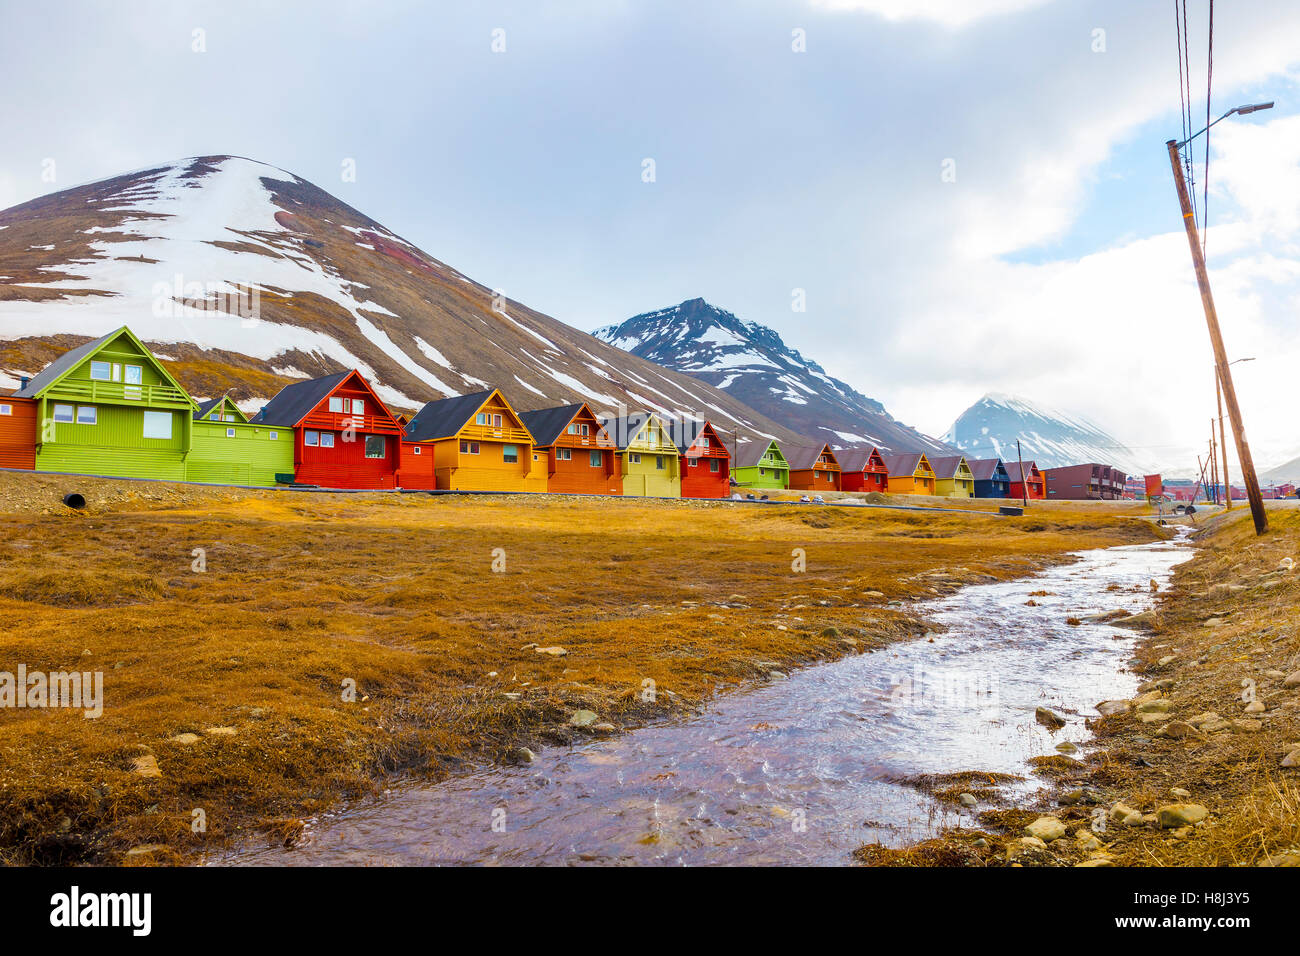 Row of colorful wooden houses at Longyearbyen in Svalbard Stock Photo